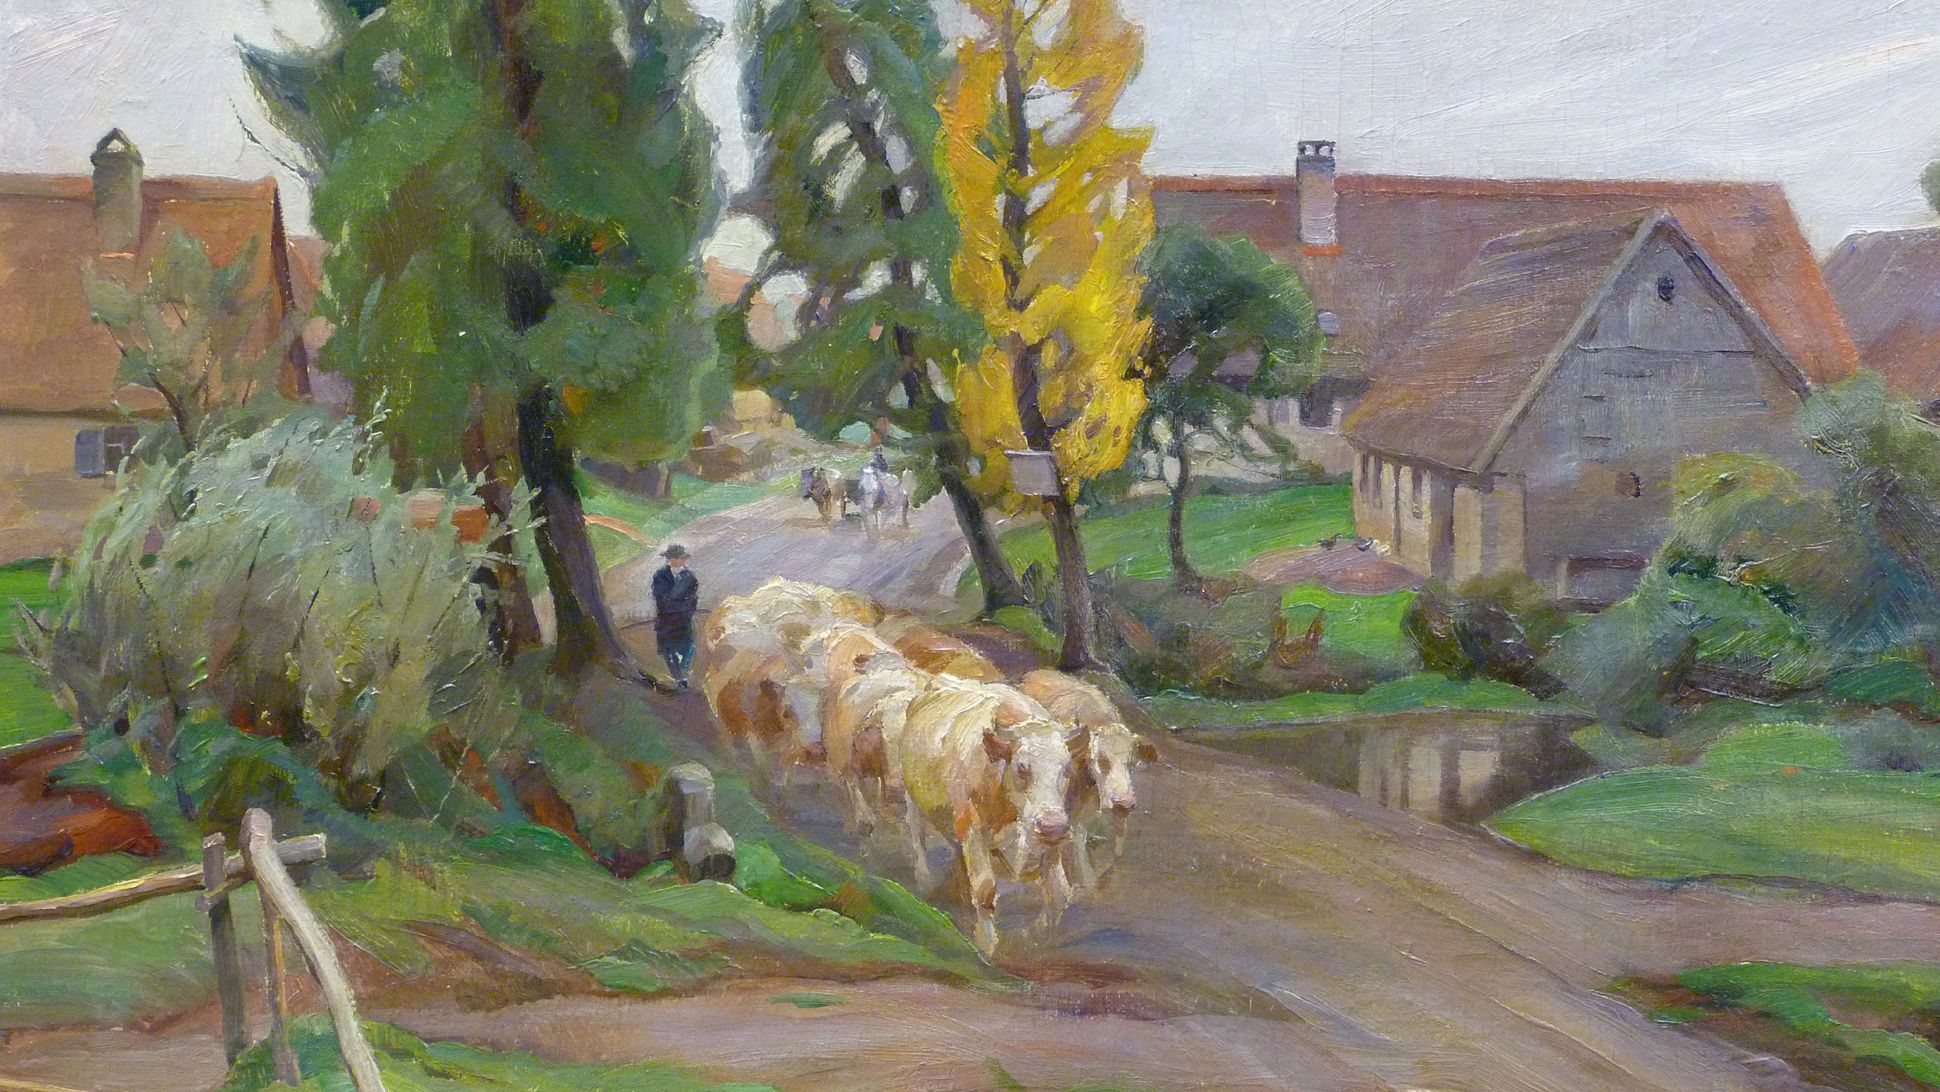 Cows in a village street Centre of the picture